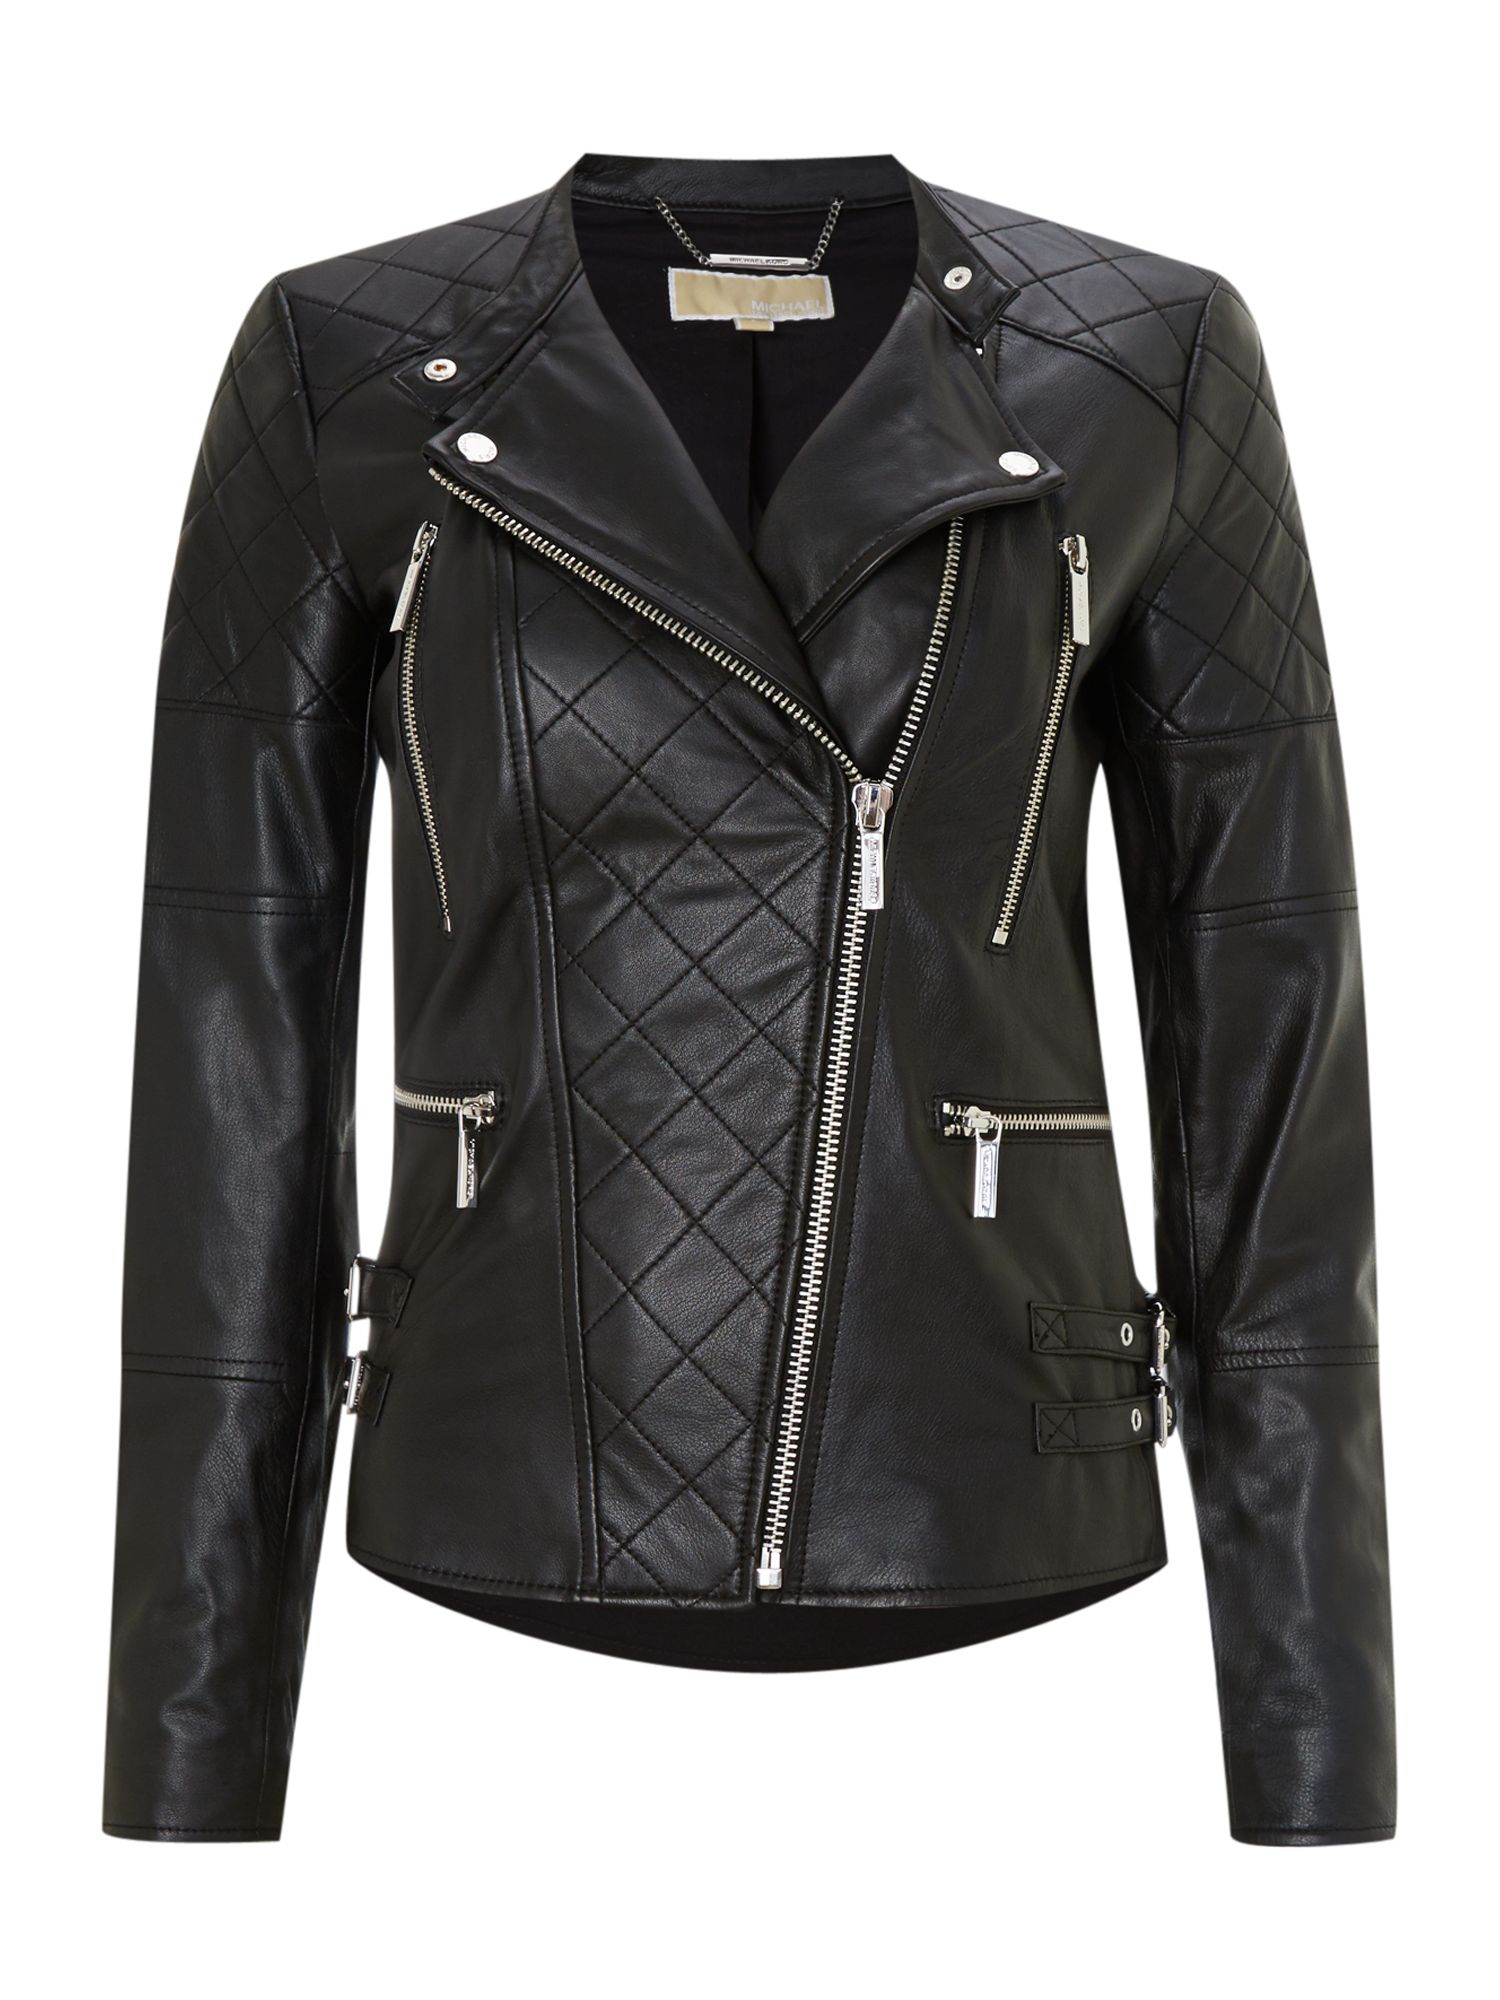 Michael kors Quilted Leather Biker Jacket in Black | Lyst